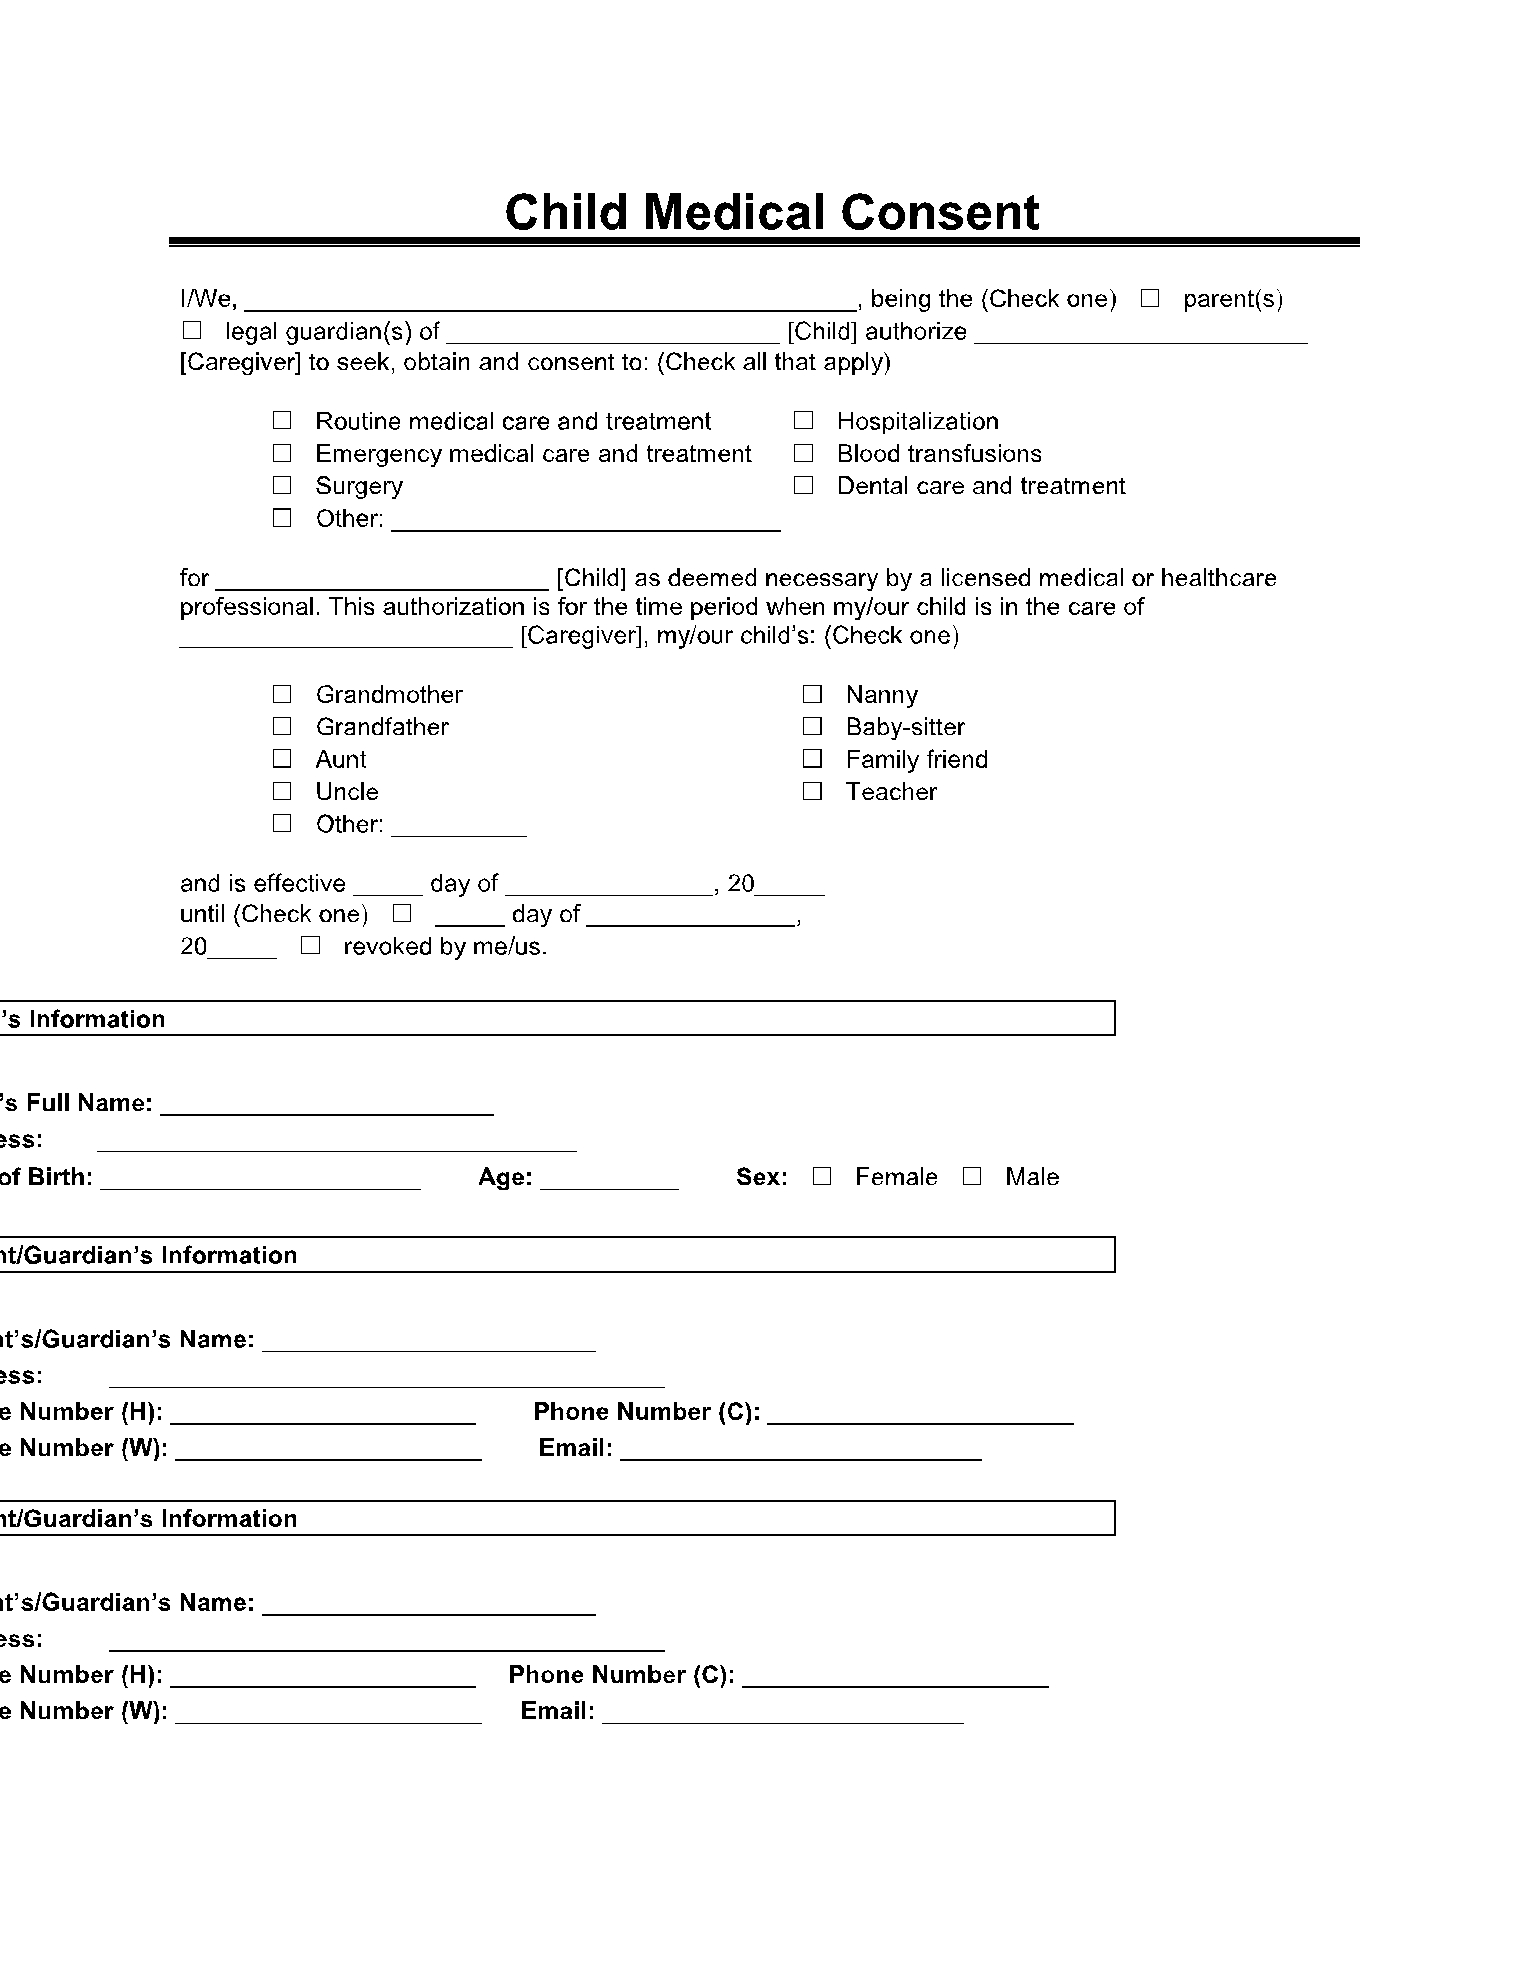 Free Minor Child Medical Consent Form Template CocoSign - Free Printable Child Medical Consent Form